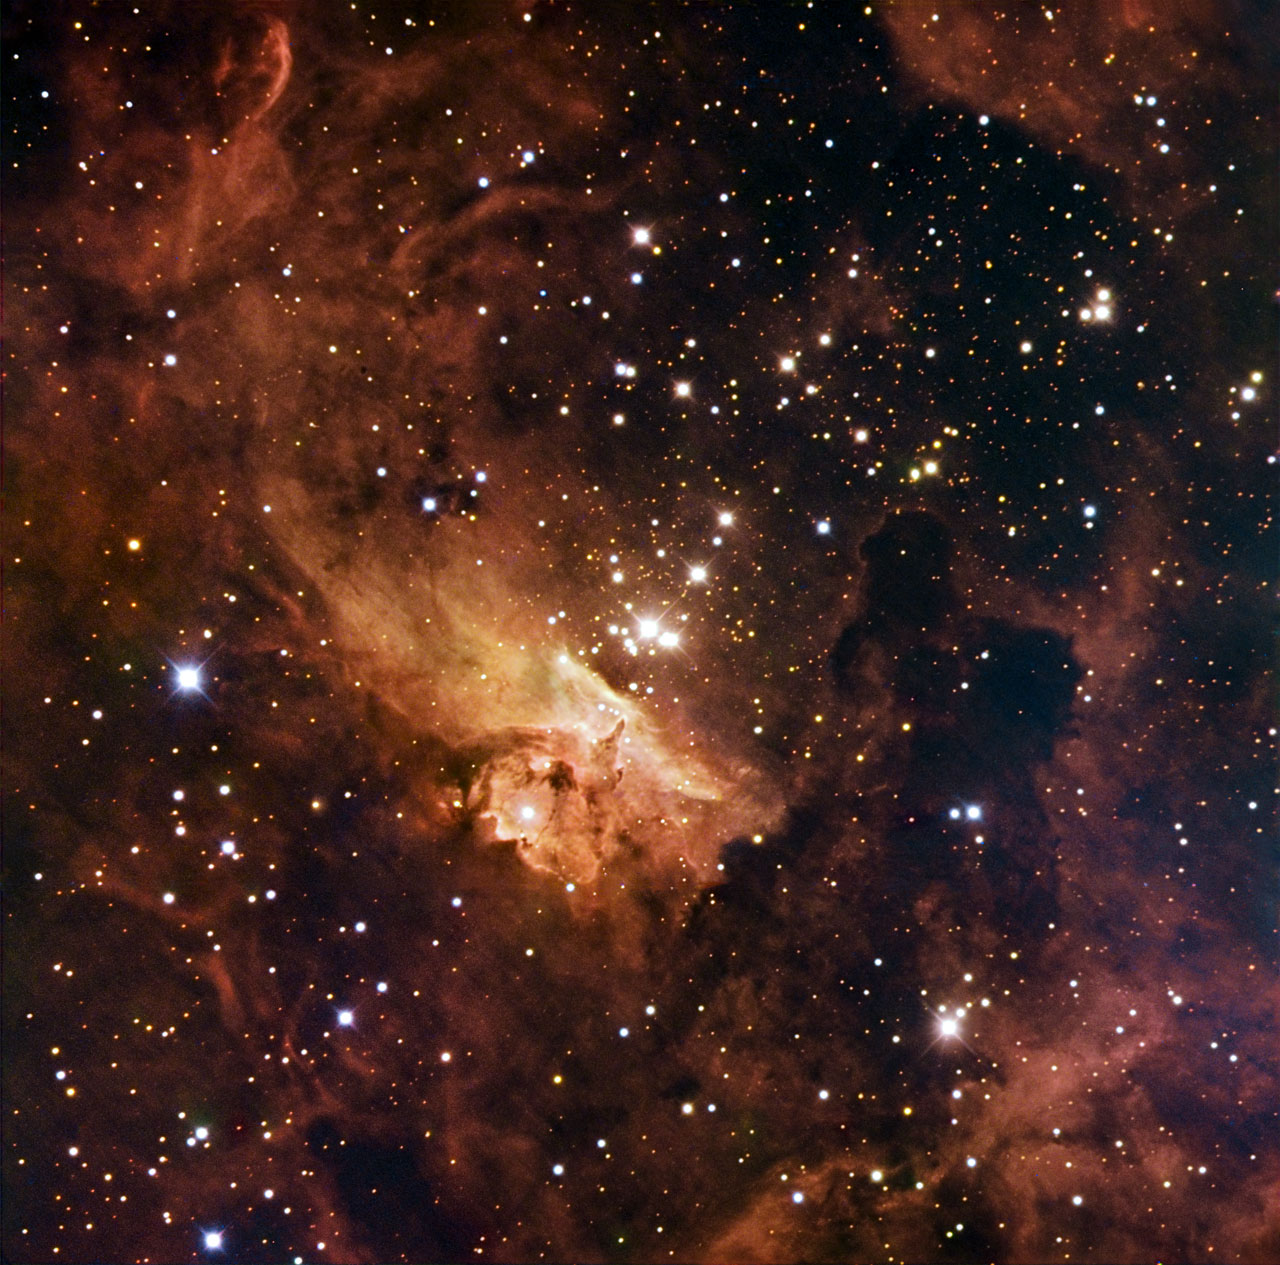 Home to some of the largest stars ever discovered, the open stellar cluster Pismis 24 blazes from the core of NGC 6357, a nebula in the constellation of Scorpius (the Scorpion). Several stars in the clusters weigh in at over 100 times the mass of the Sun, making them real monster stars. The strange shapes taken by the clouds are a result of the huge amount of blazing radiation emitted by these massive, hot stars. The gas and dust of the nebula hide huge baby stars in the nebula from telescopes observing in visible light, as well as adding to the hazy appearance of the image. This image combines observations performed through three different filters in visible light (B, V, R) with the 1.5-metre Danish telescope at the ESO La Silla Observatory in Chile.